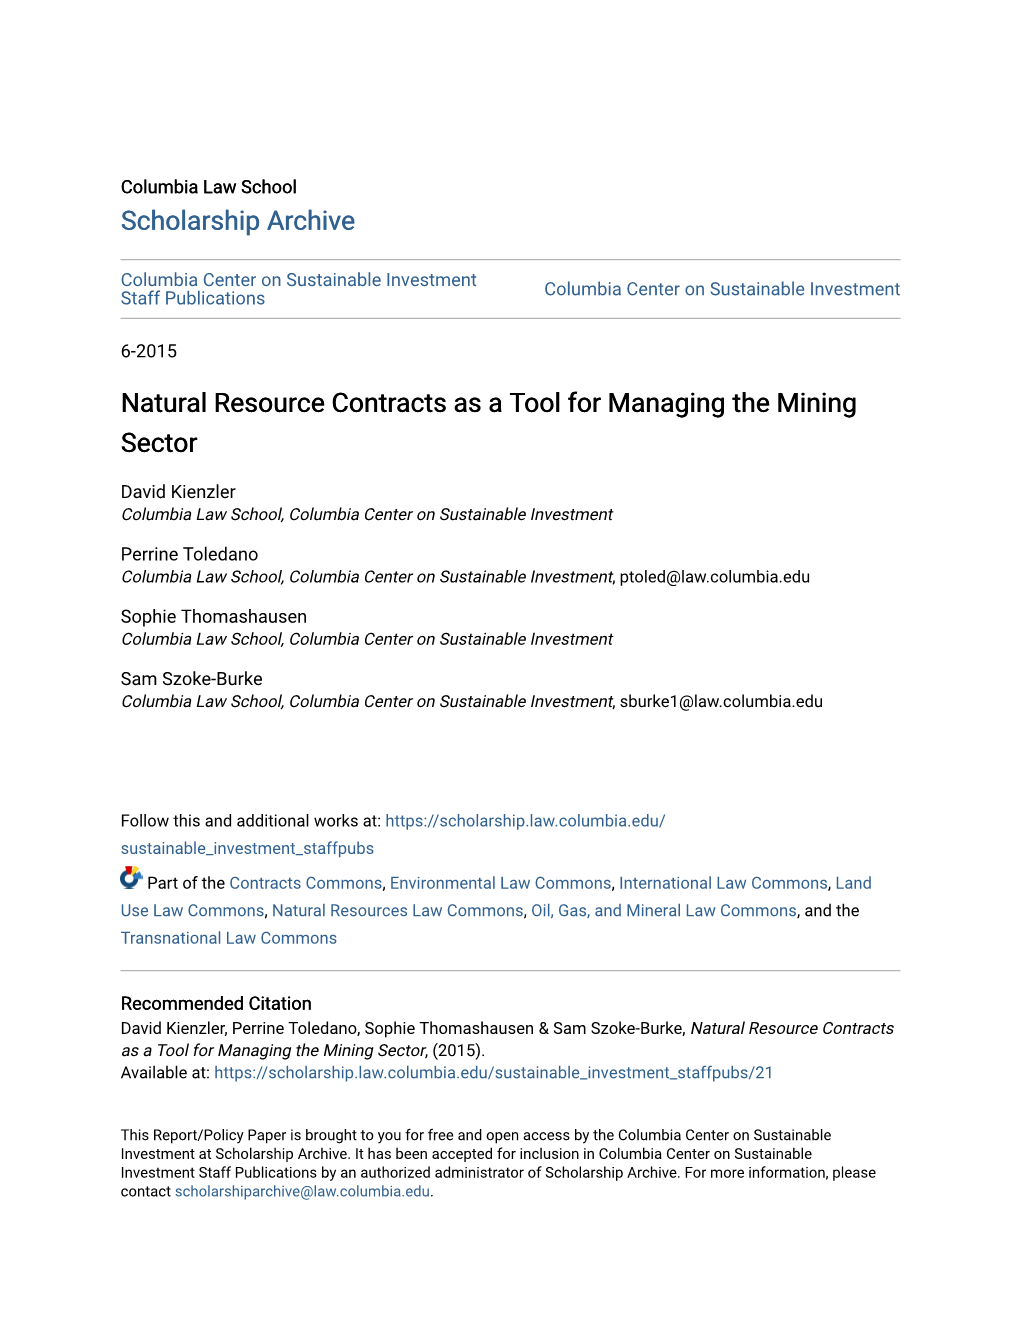 Natural Resource Contracts As a Tool for Managing the Mining Sector